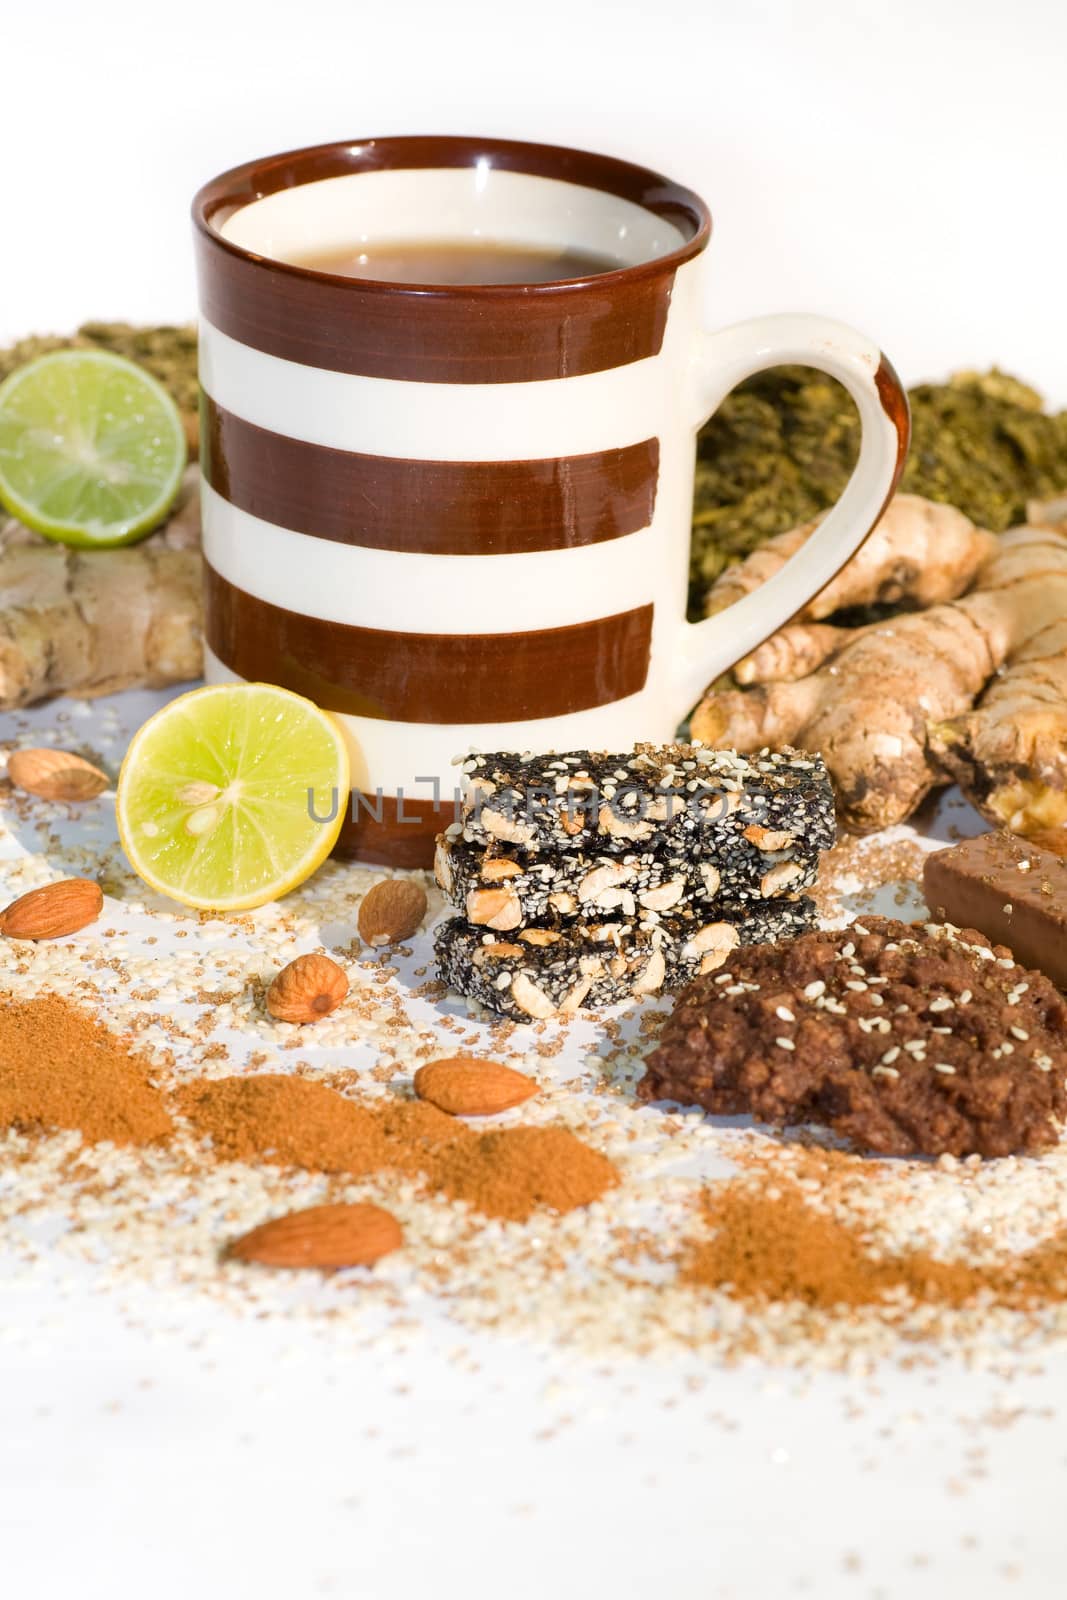 cup of tea with ingredients for tea by foryouinf